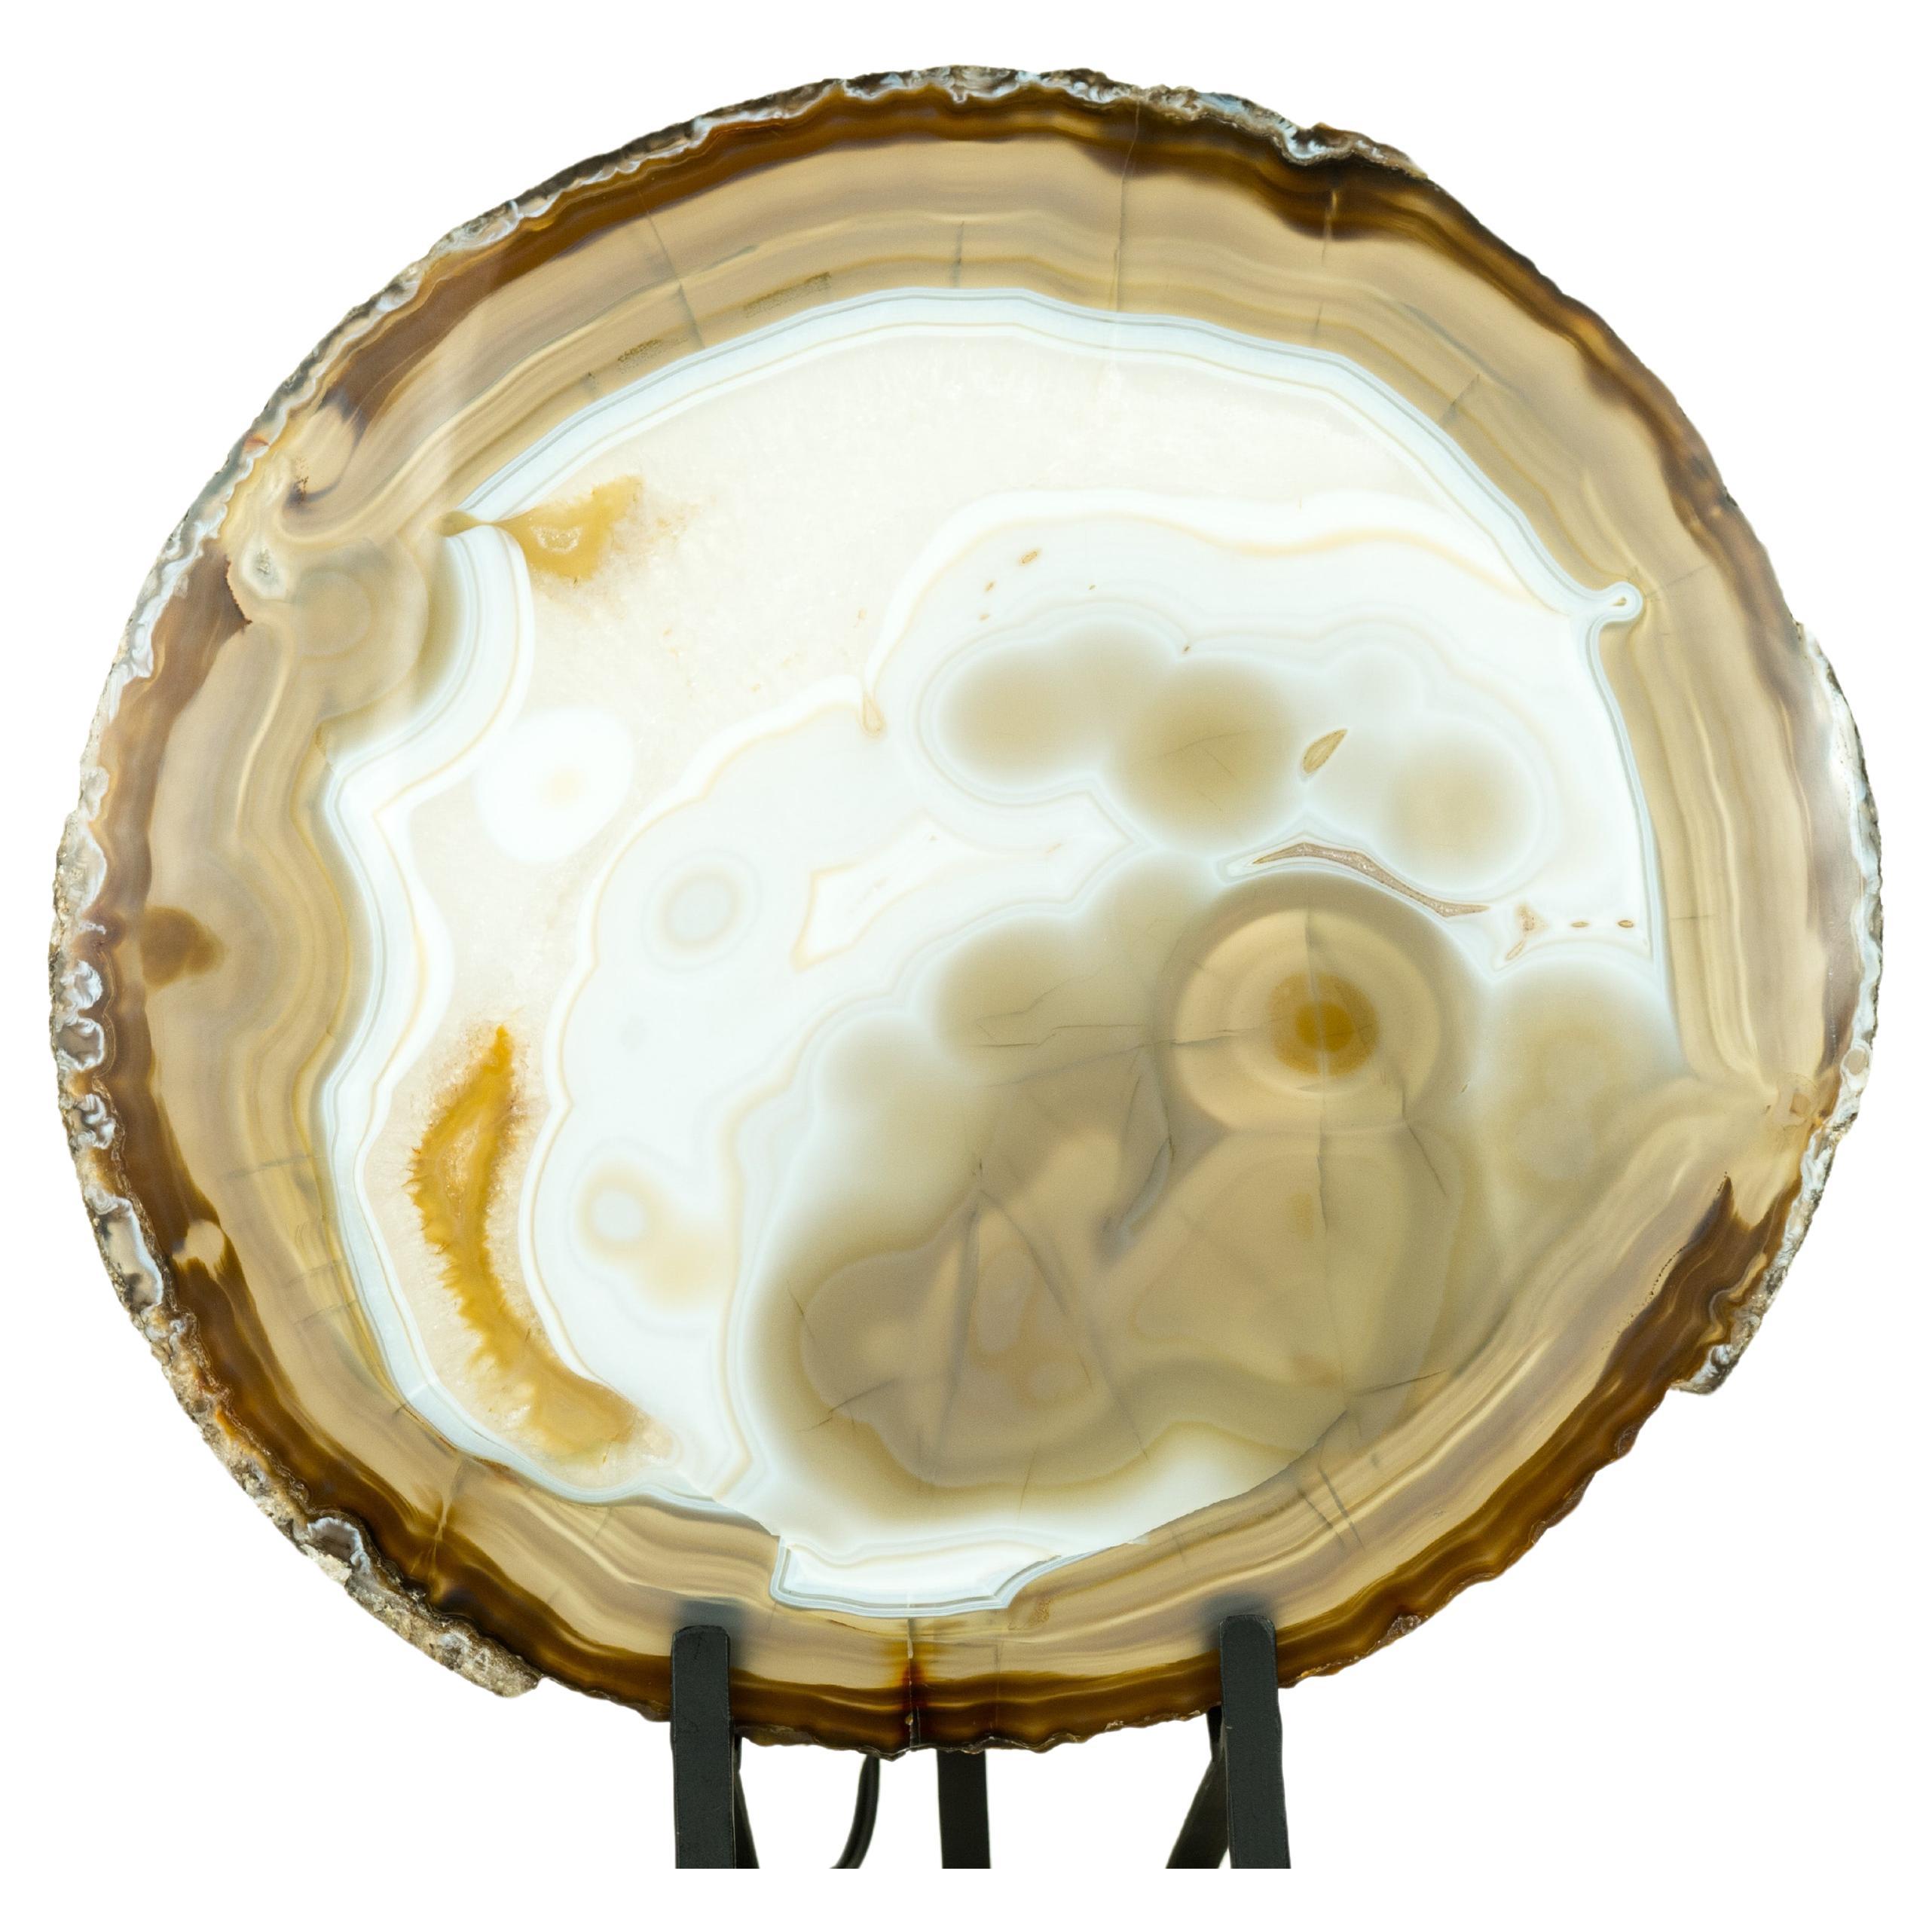 Collector-Grade Agate Slice with a Drawing of a Person Contemplating the Sky